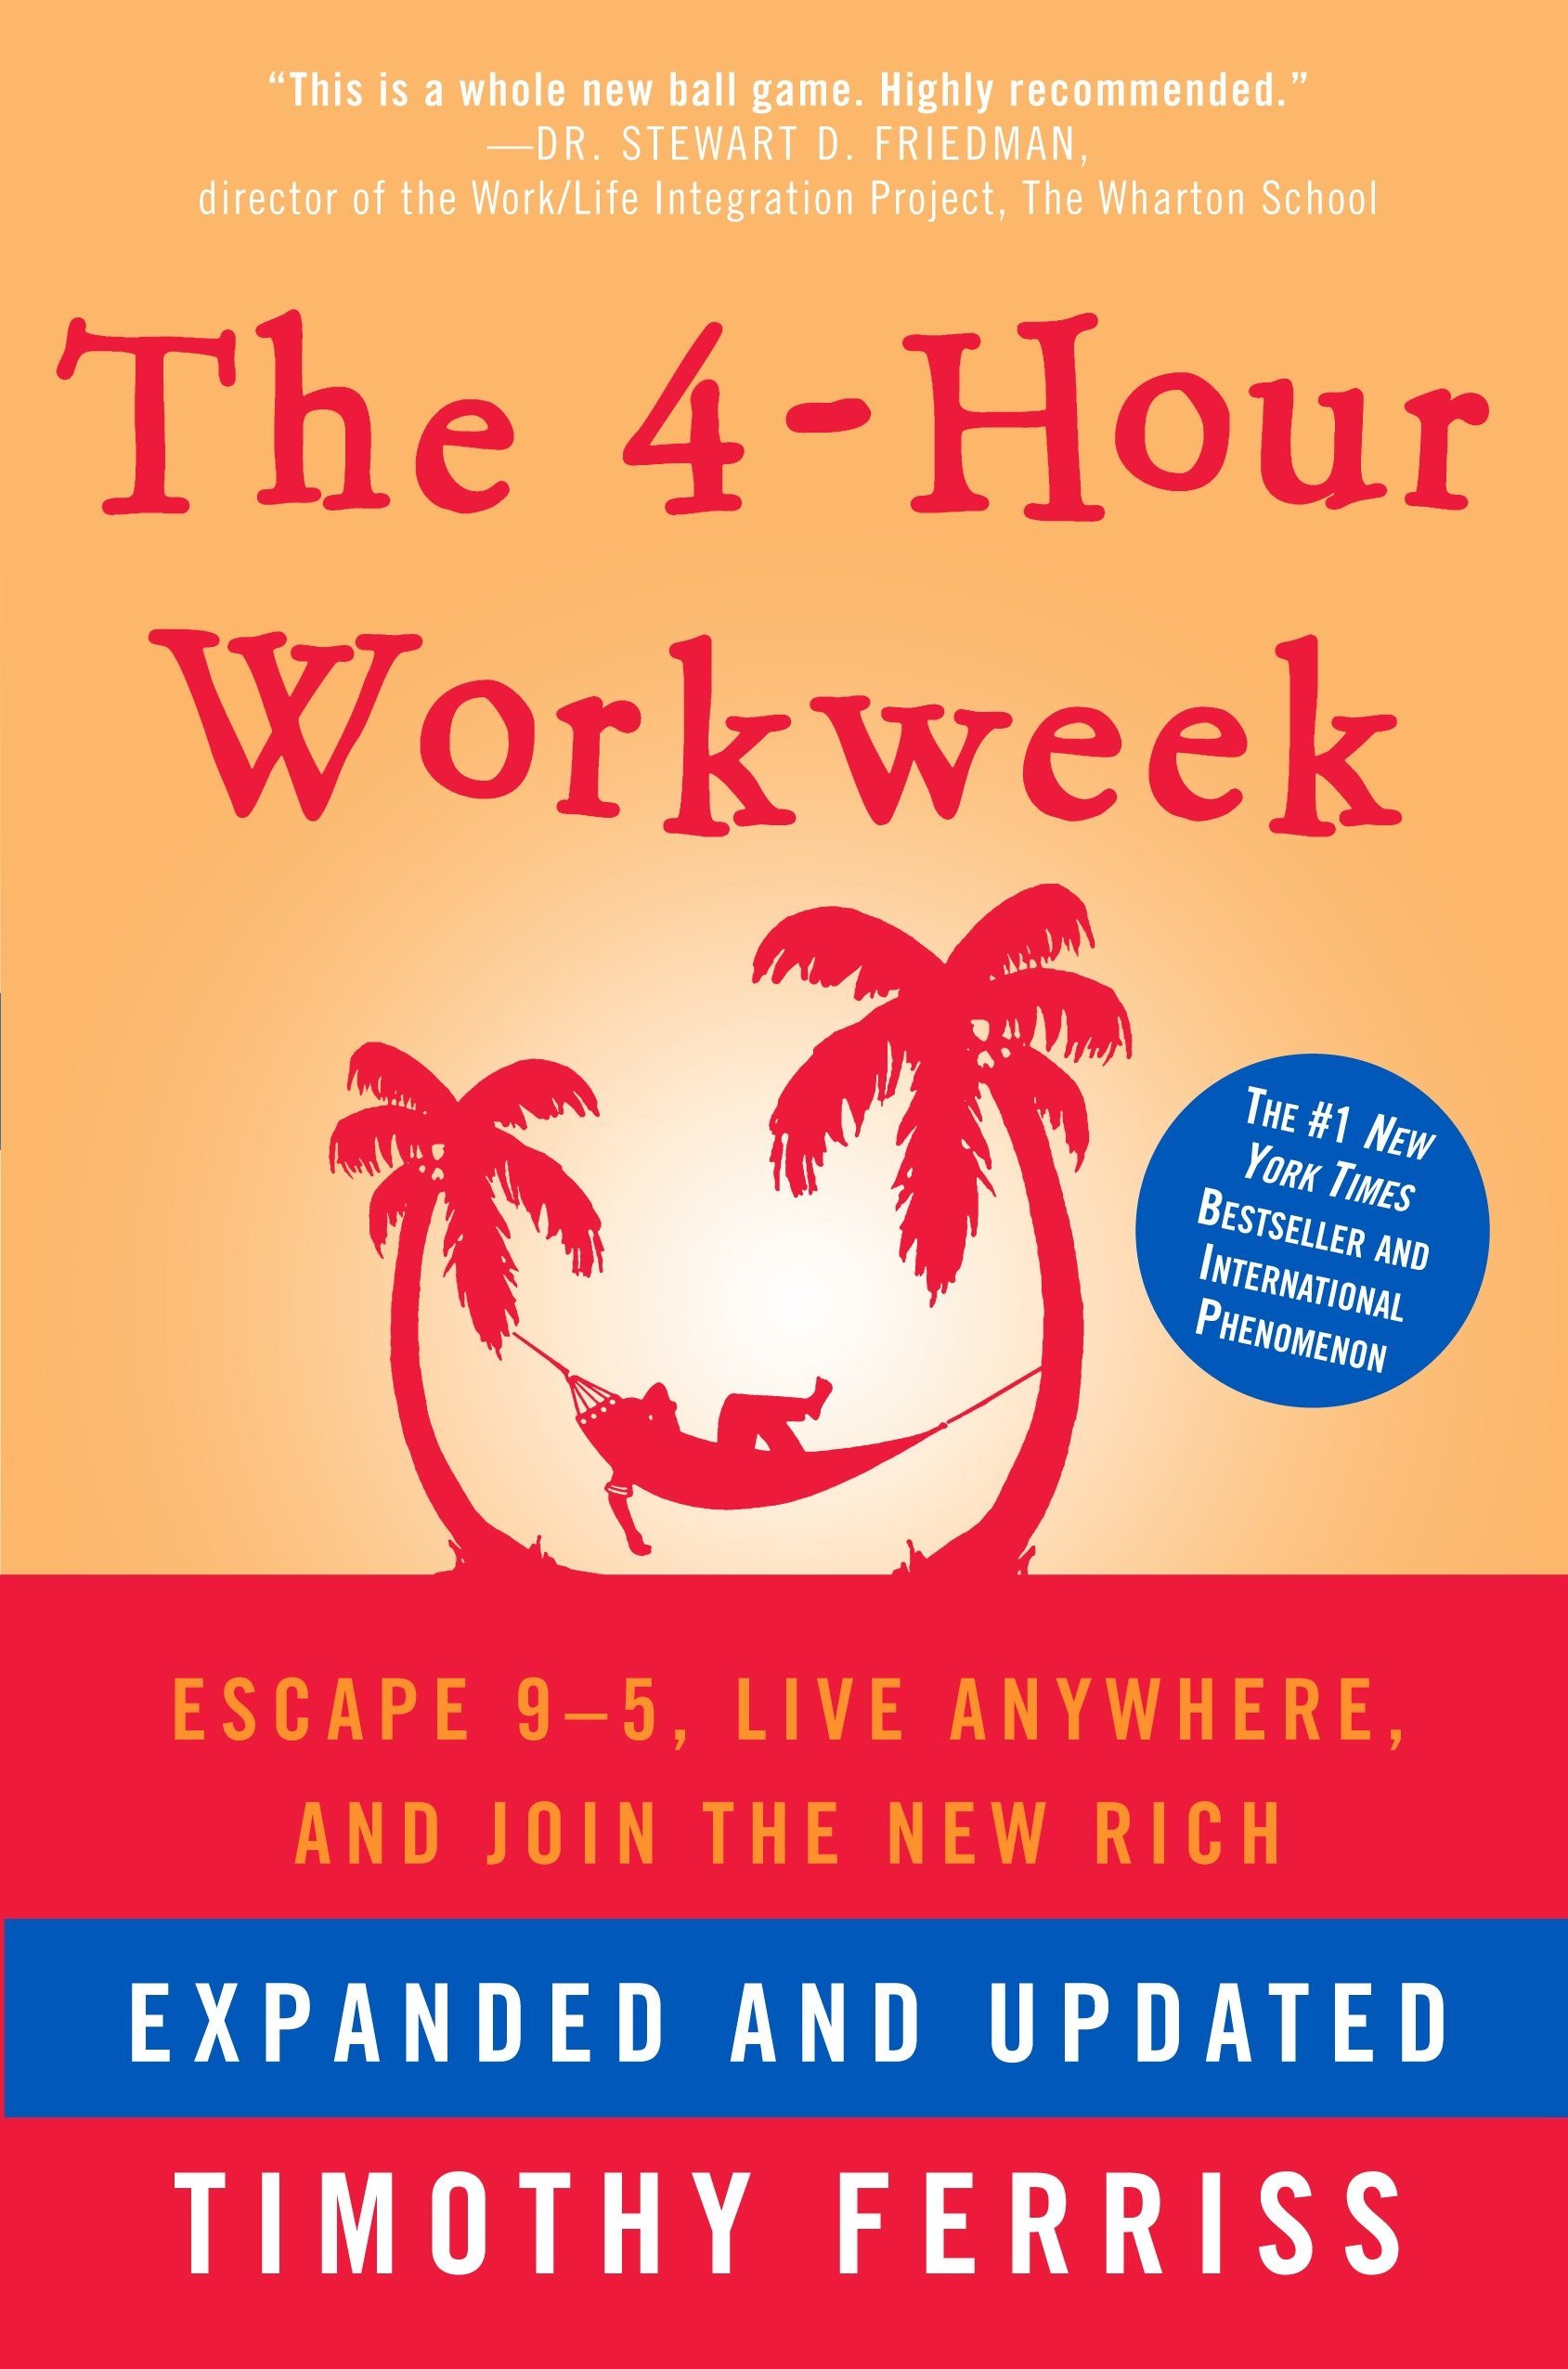 4-HOUR WORKWEEK, EXPANDED AND UPDATED